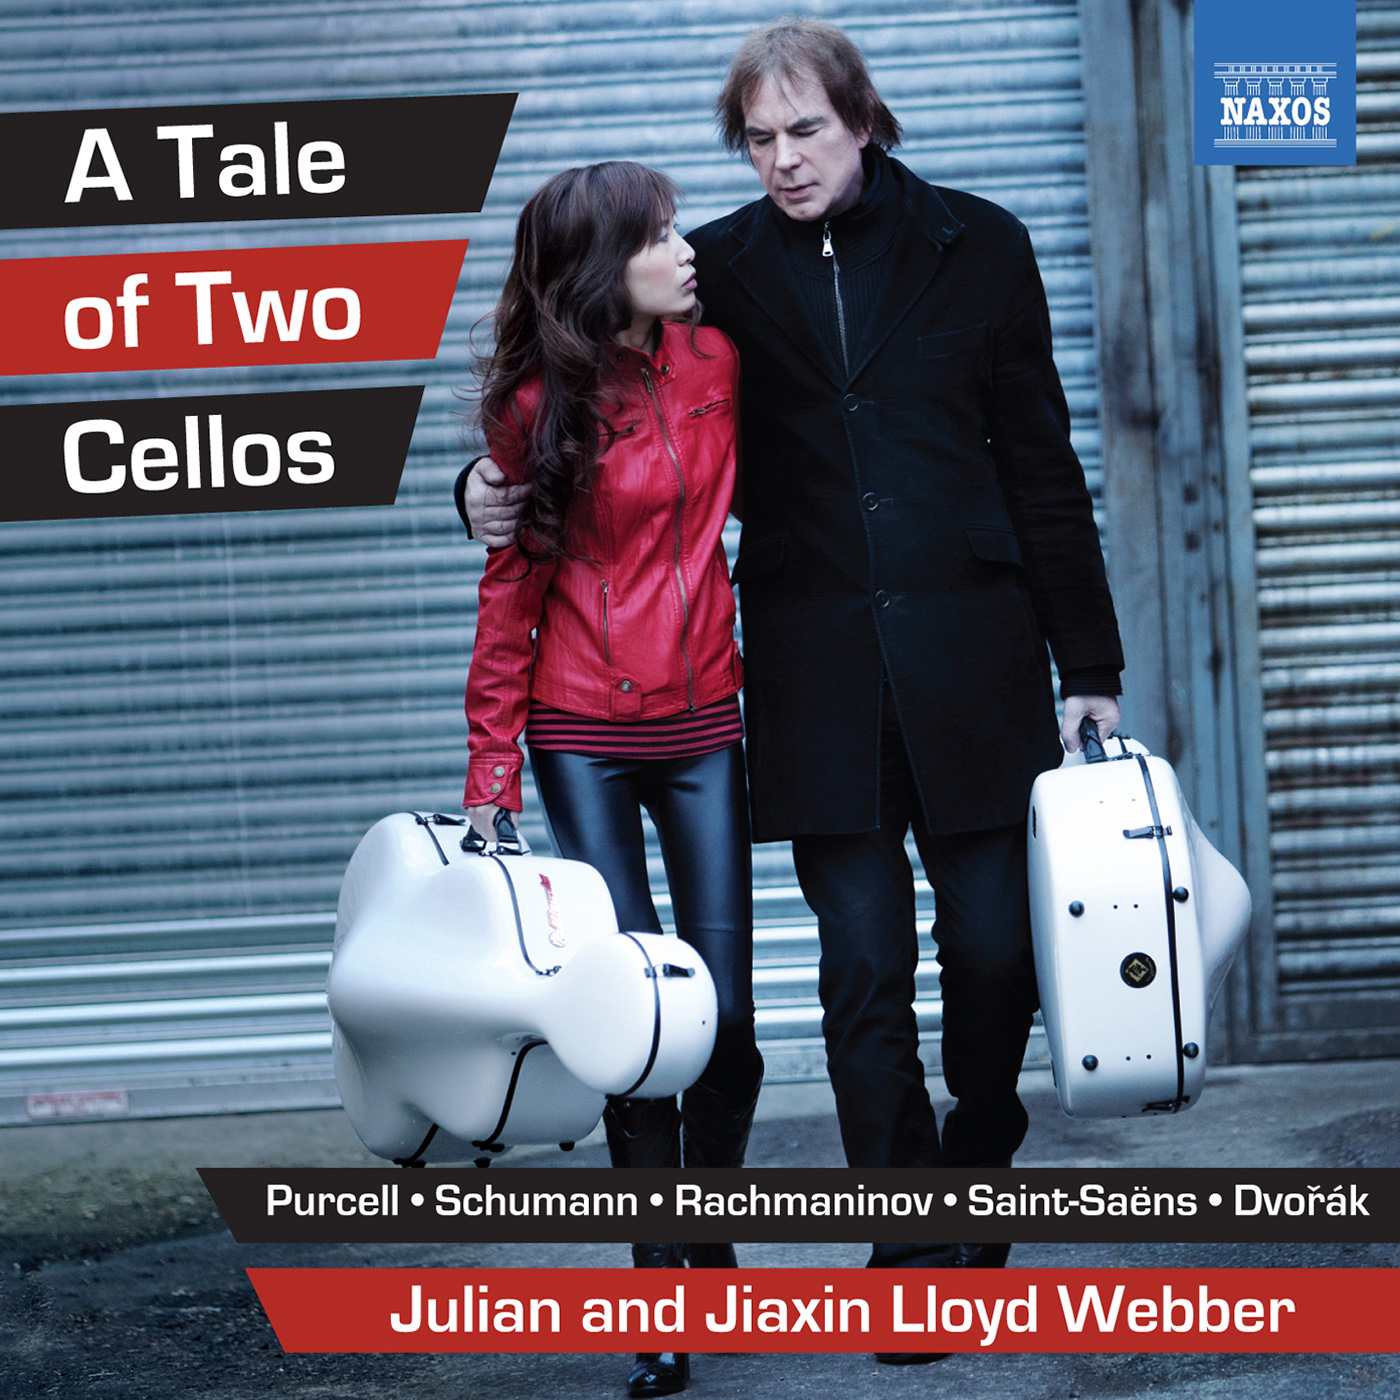 The Gadfly, Op. 97: Prelude (arr. J .Lloyd Webber for 2 cellos and piano)